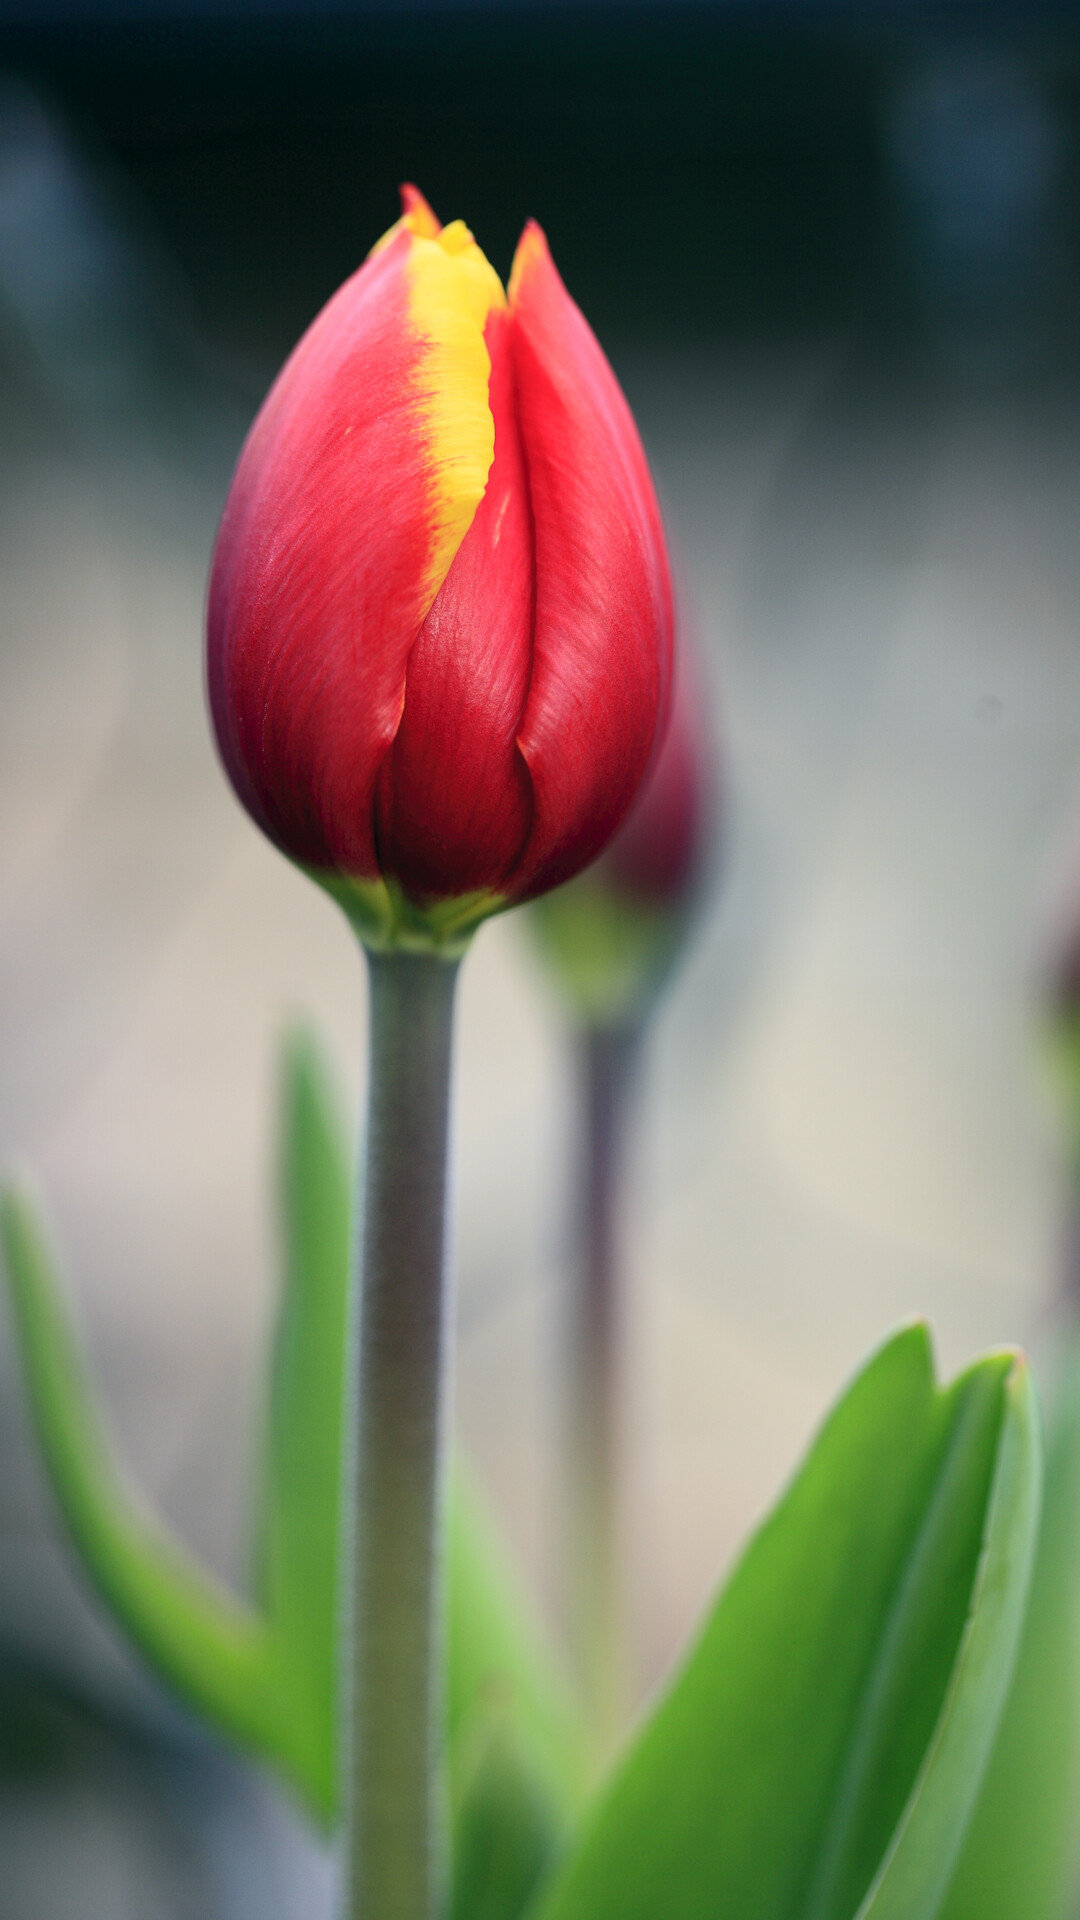 Tulip: The flowers indigenous to mountainous areas with temperate climates, where they are a common element of steppe and winter-rain Mediterranean vegetation. 1080x1920 Full HD Wallpaper.